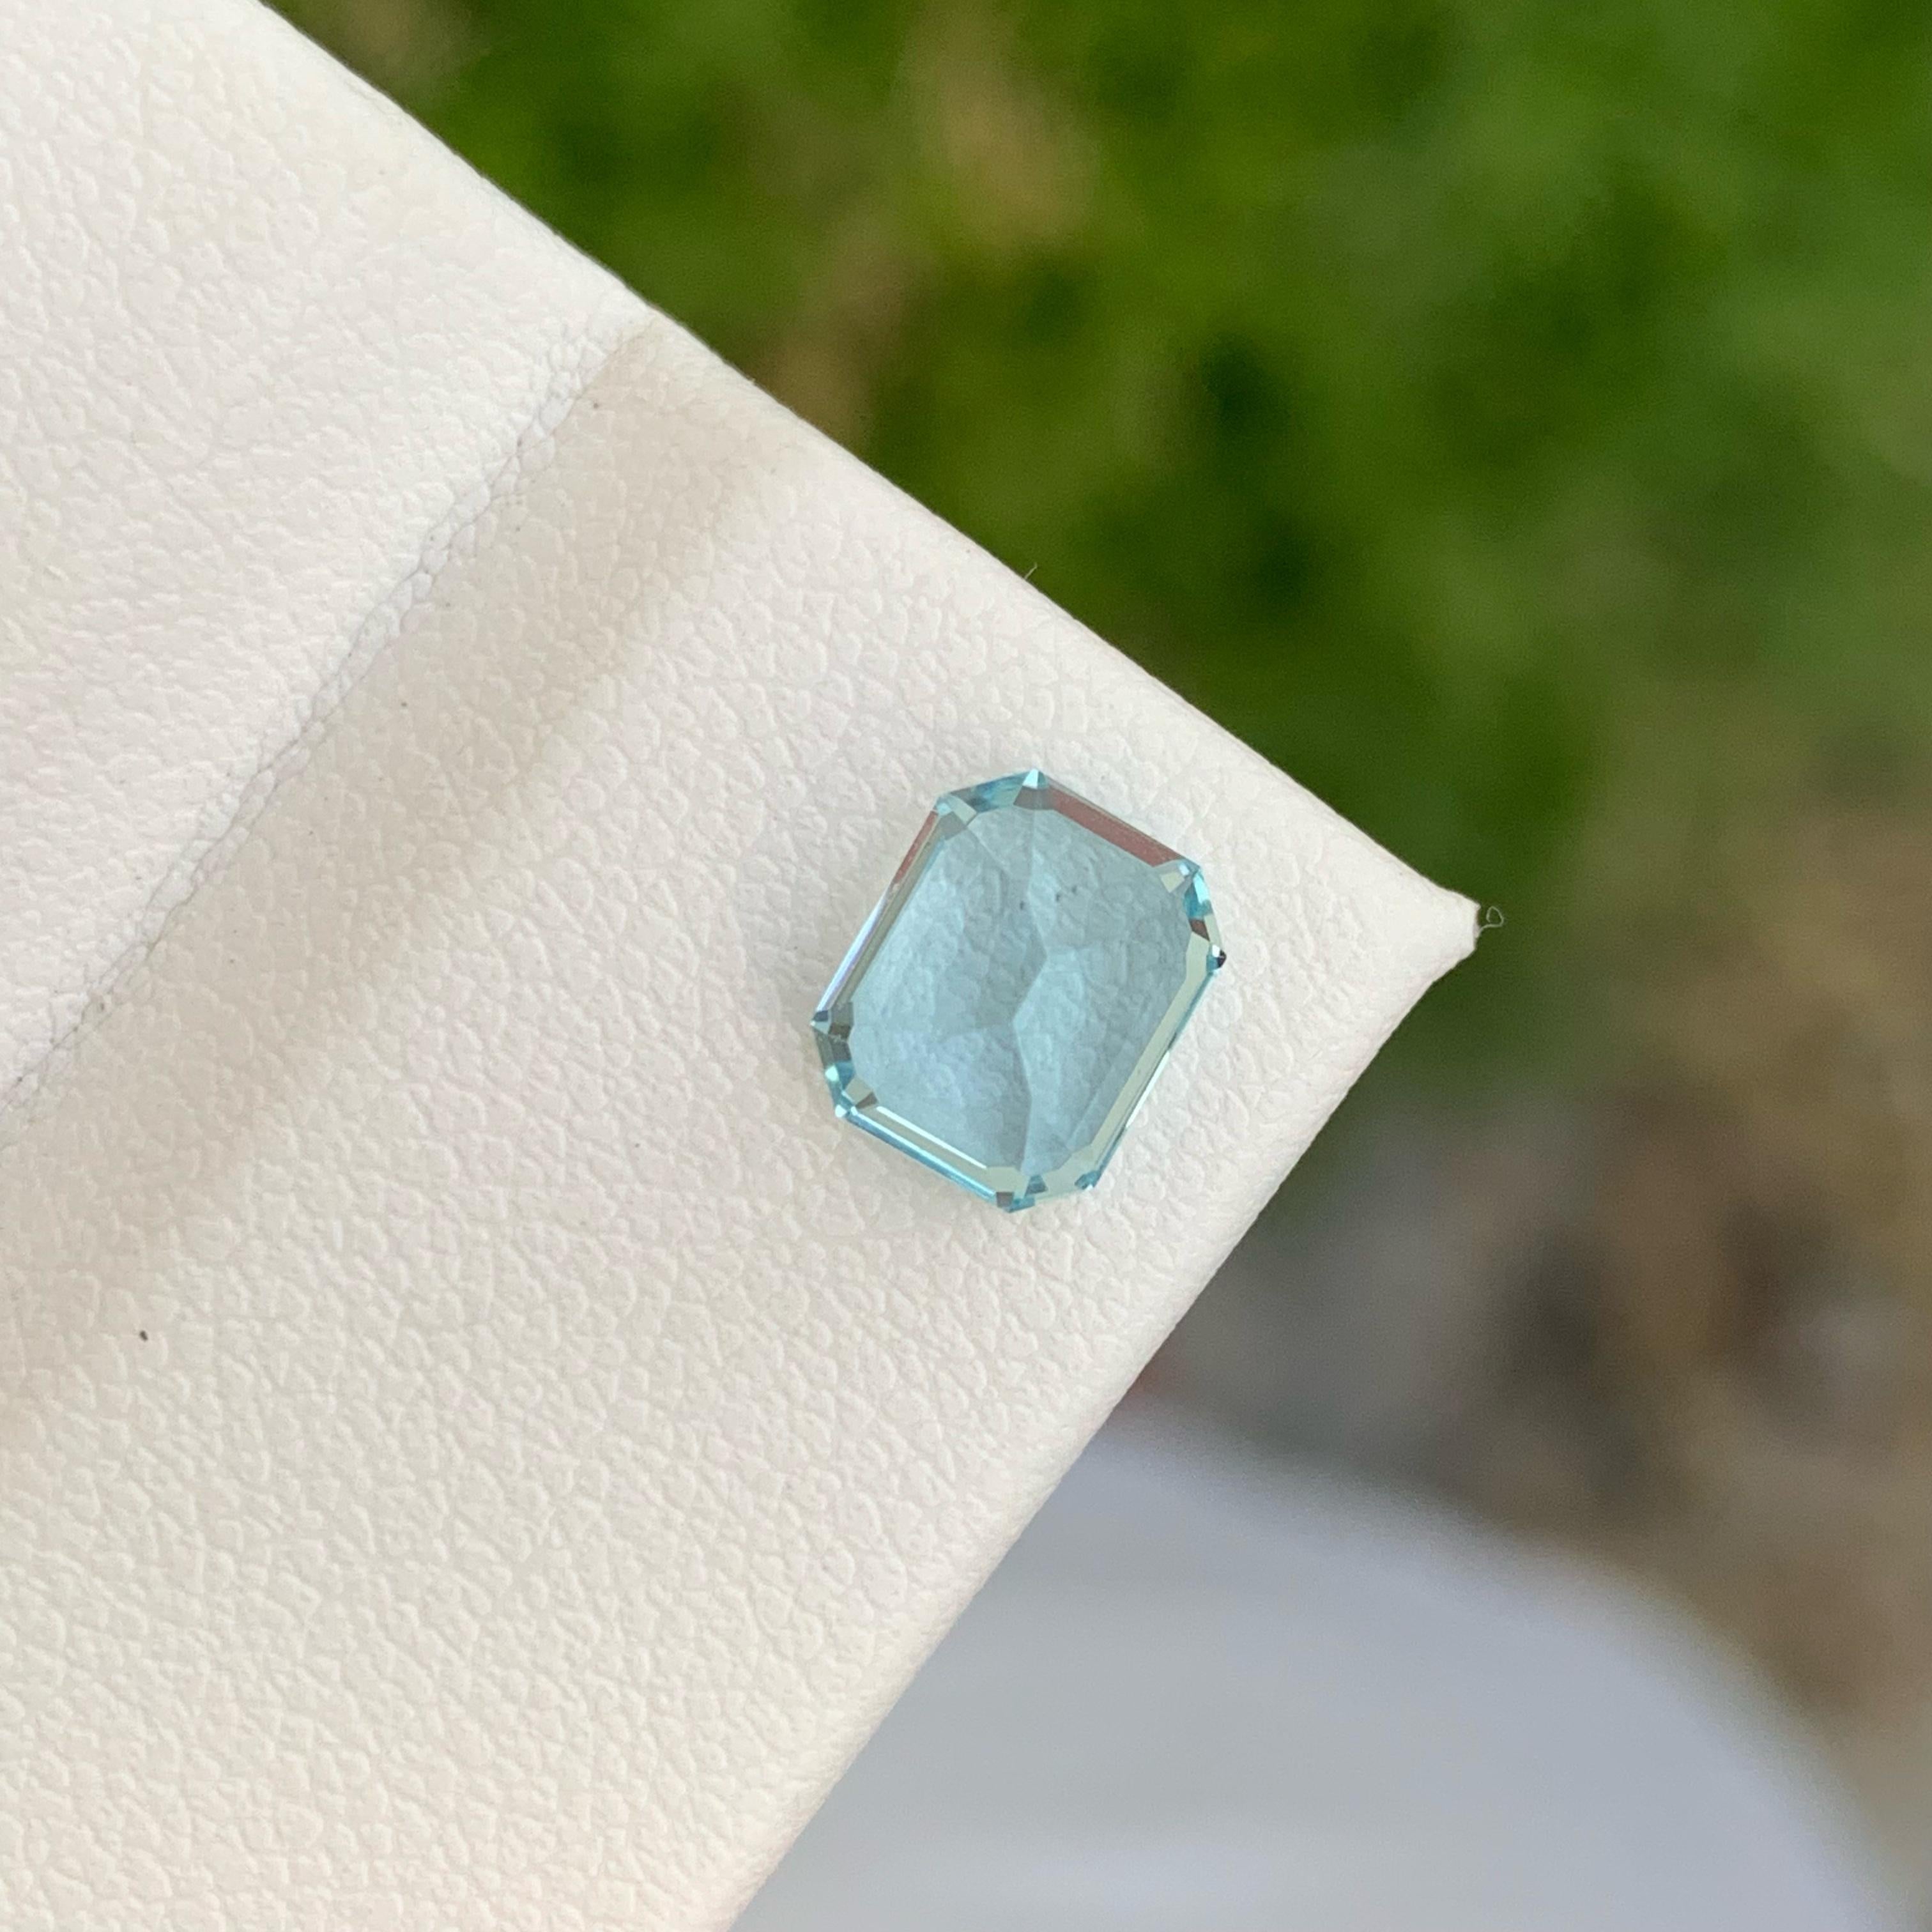 Weight 1.50 carats 
Dimensions 7.6 x 6.2 x 5 mm
Treatment None 
Origin Pakistan 
Clarity Eye Clean 
Shape Octagon 
Cut Emerald 



Discover the timeless beauty of our 1.50 carat Blue Aquamarine, a natural wonder sourced from the rich gemstone mines